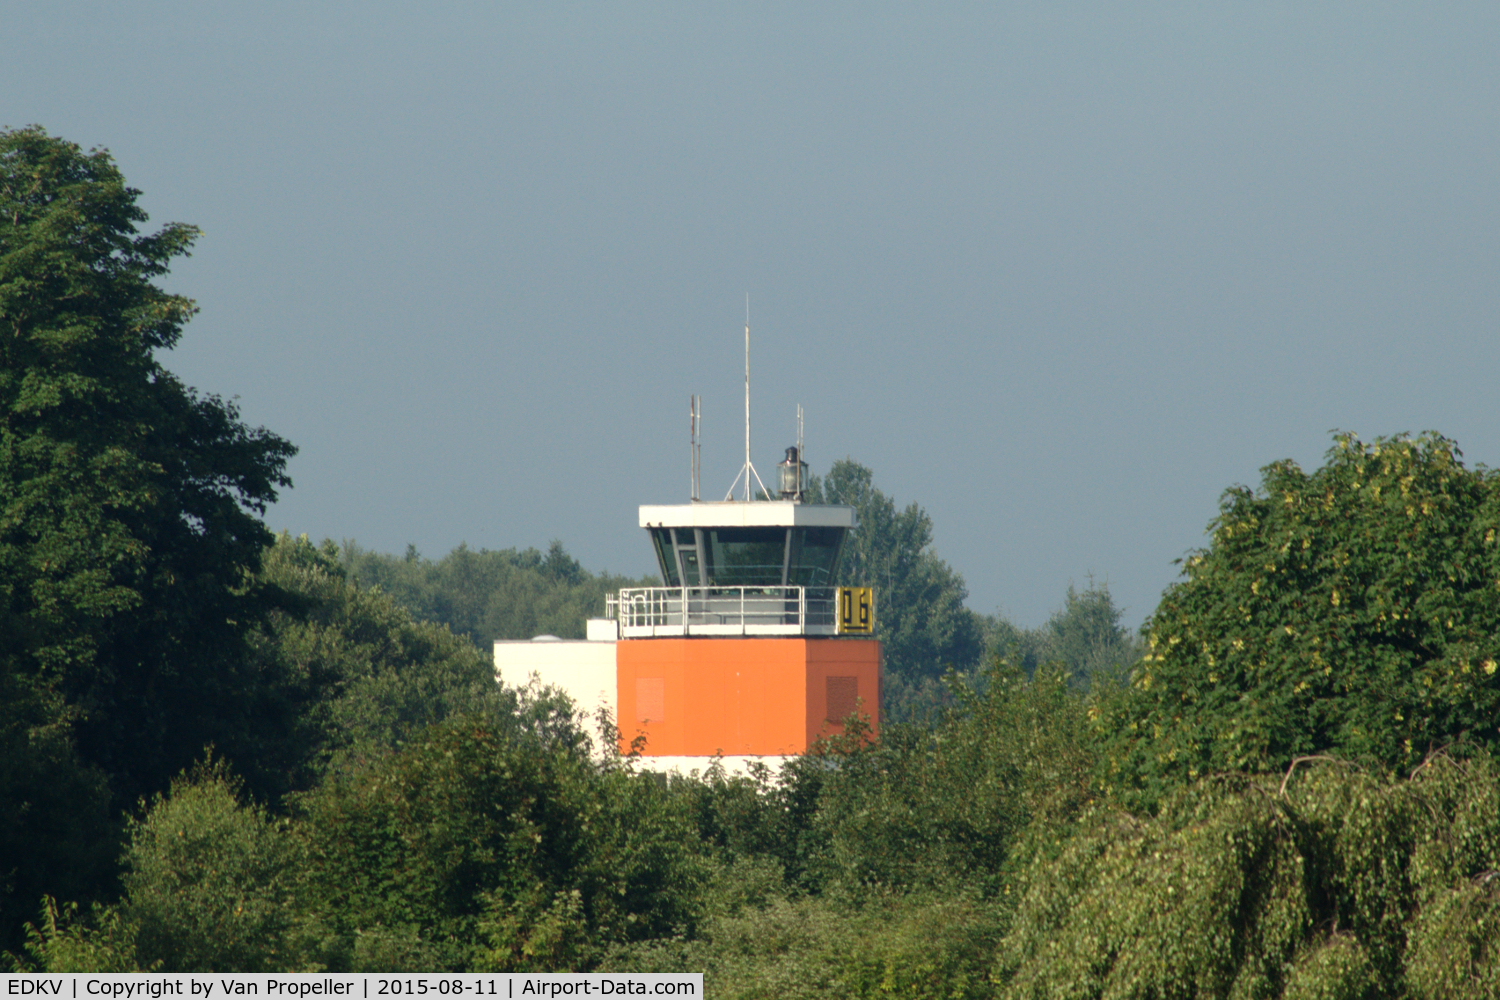 Dahlemer Binz Airport, Dahlem Germany (EDKV) - The tower ...